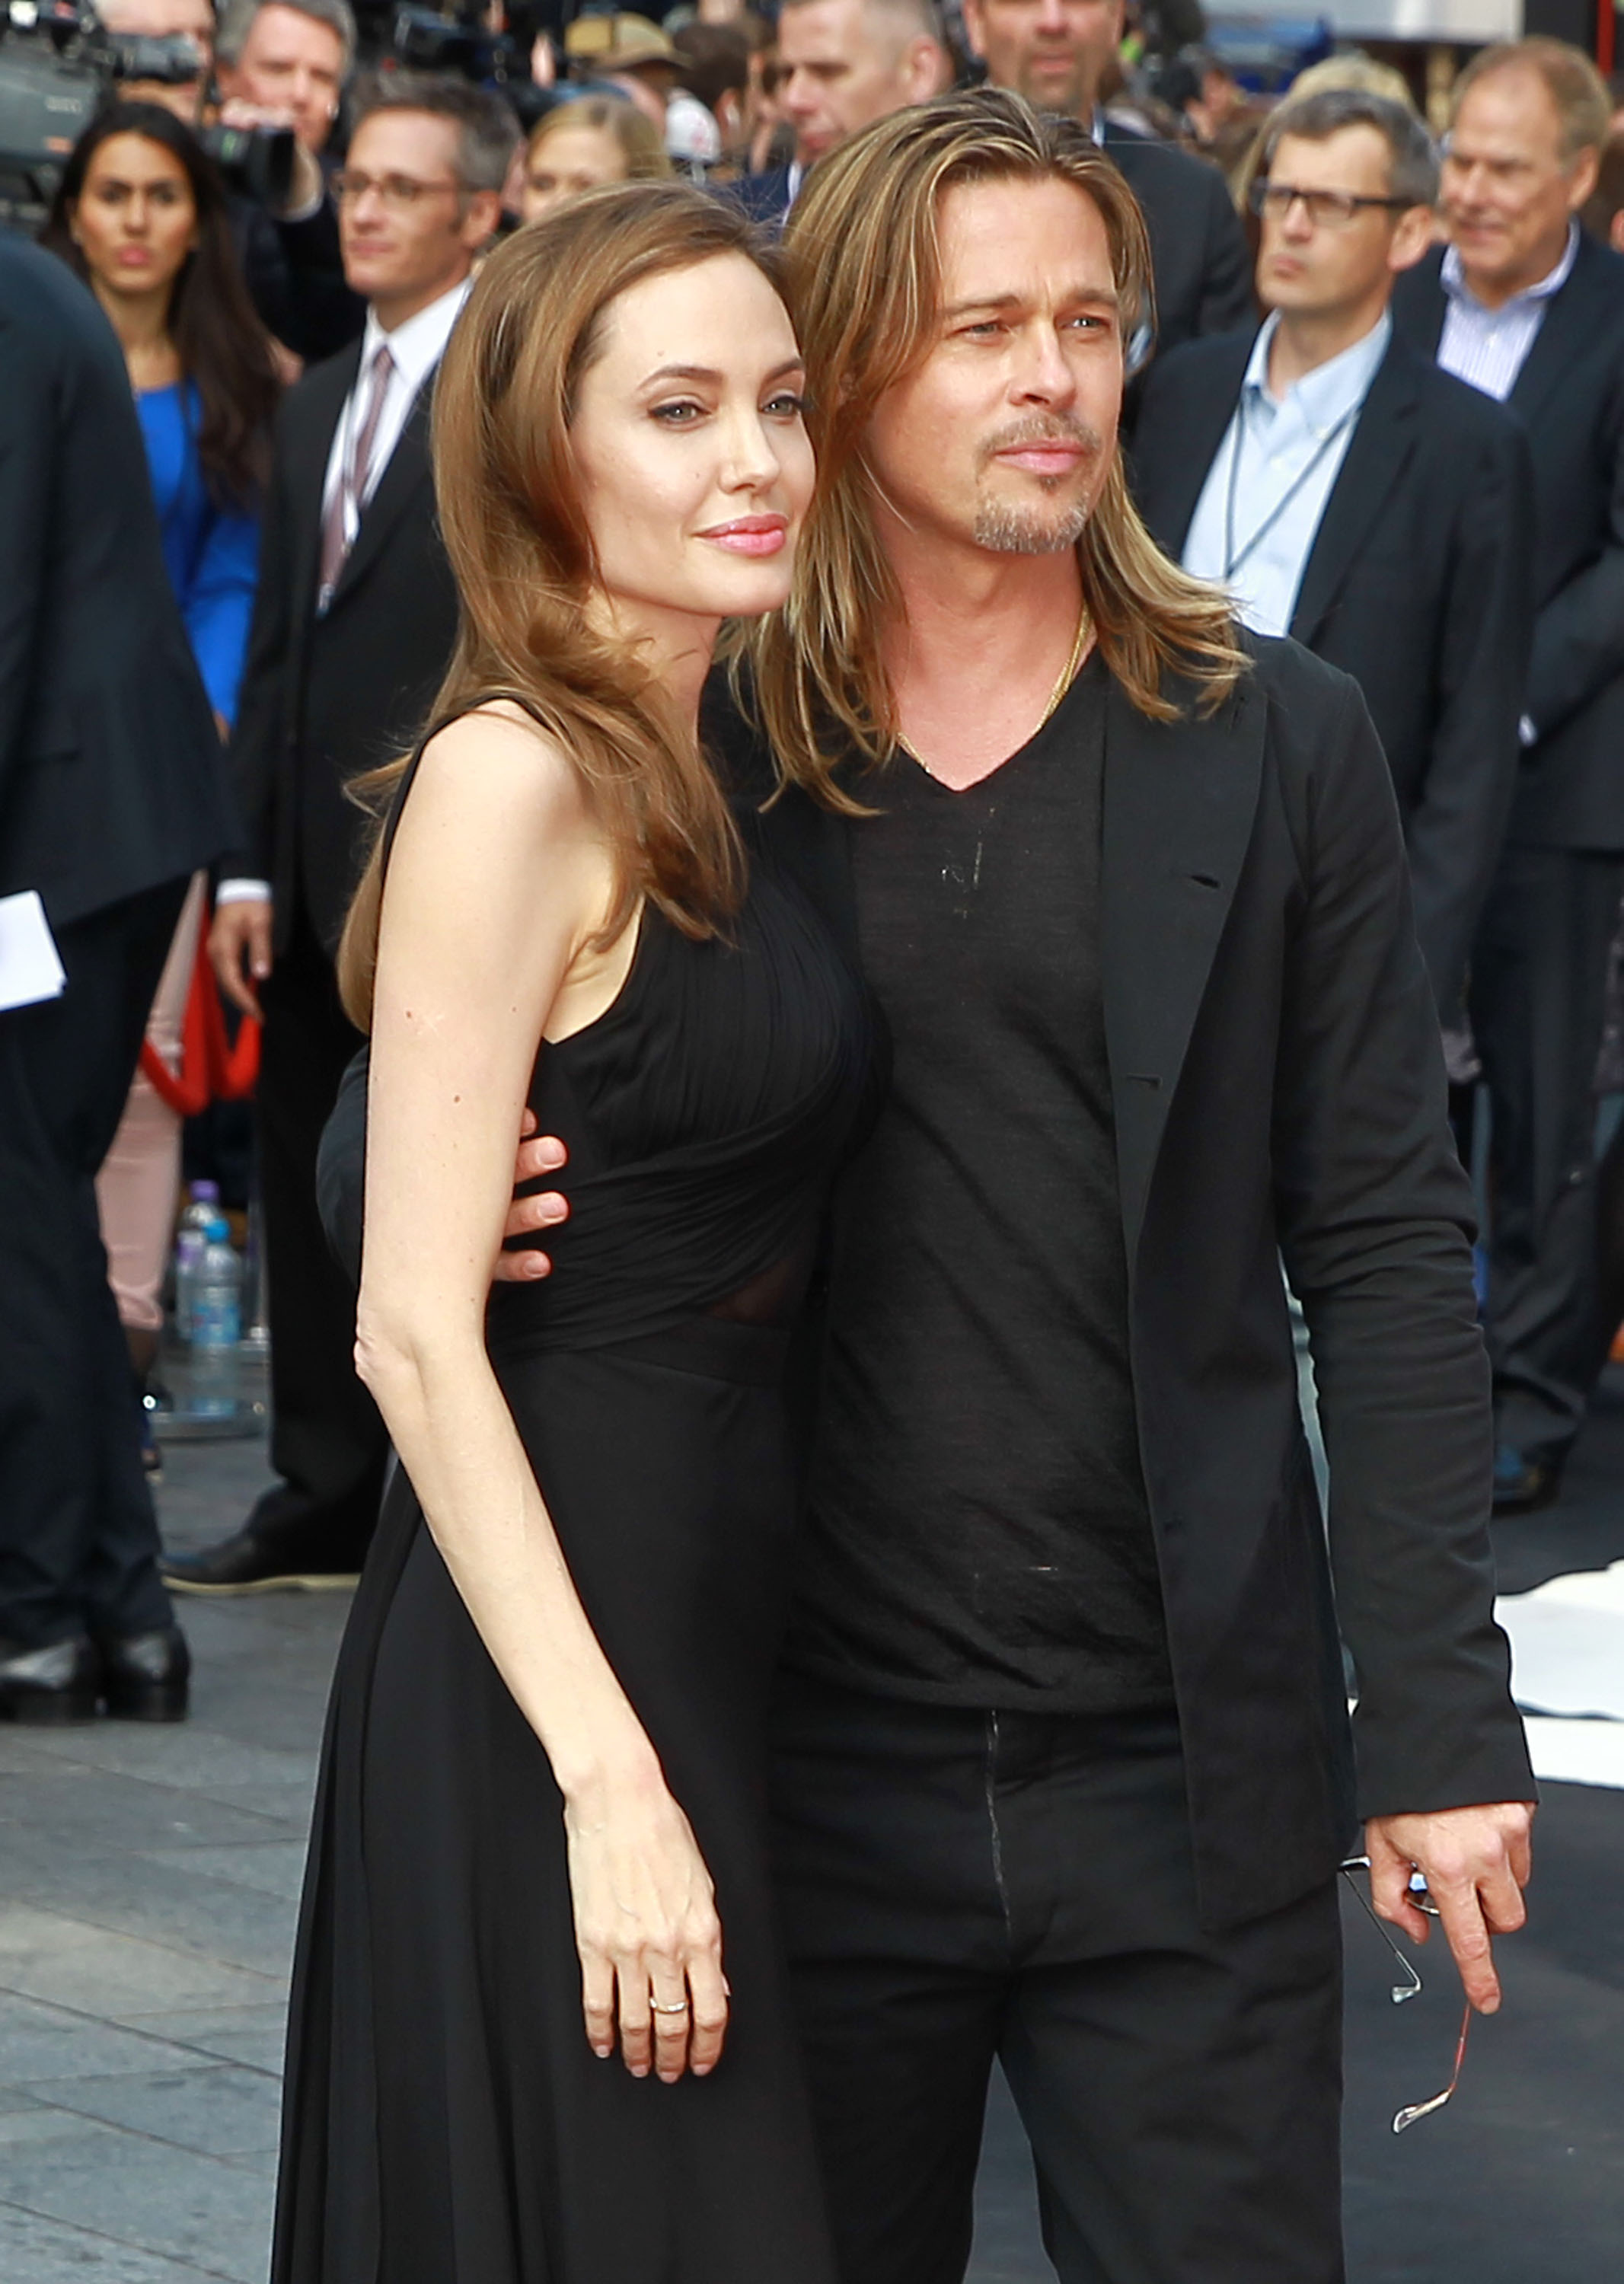 Brad Pitt and Angelina Jolie attend the 'World War Z' world premiere at the Empire Leicester Square in London, England, on June 30, 2013. | Source: Getty Images